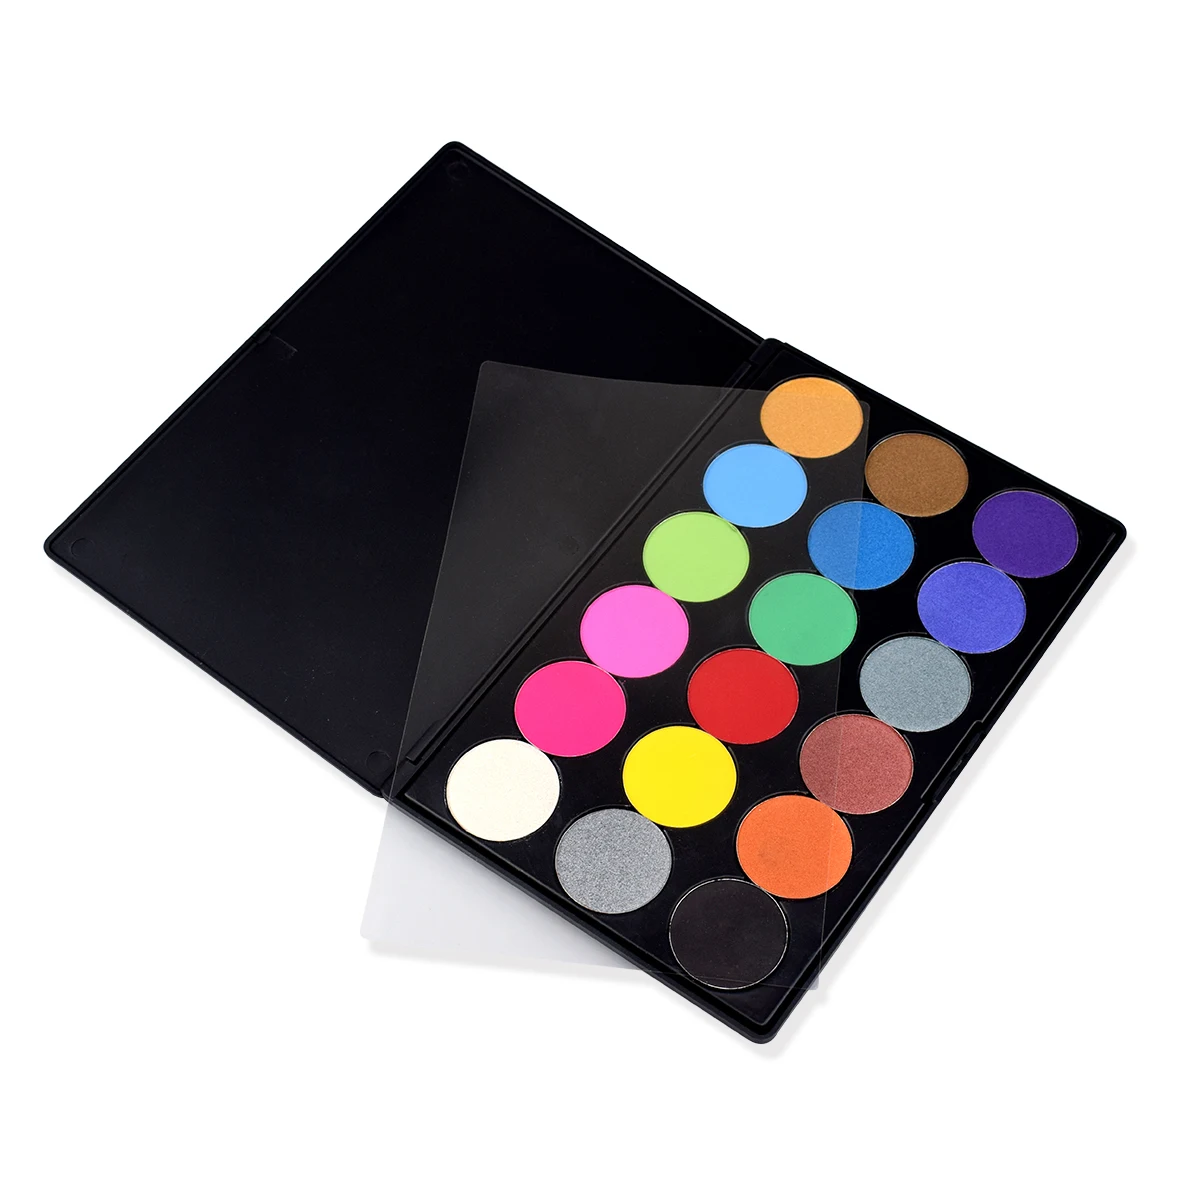 Hot Selling 18 Color Eye Shadow Palette Create Your Own Brand Eyeshadow